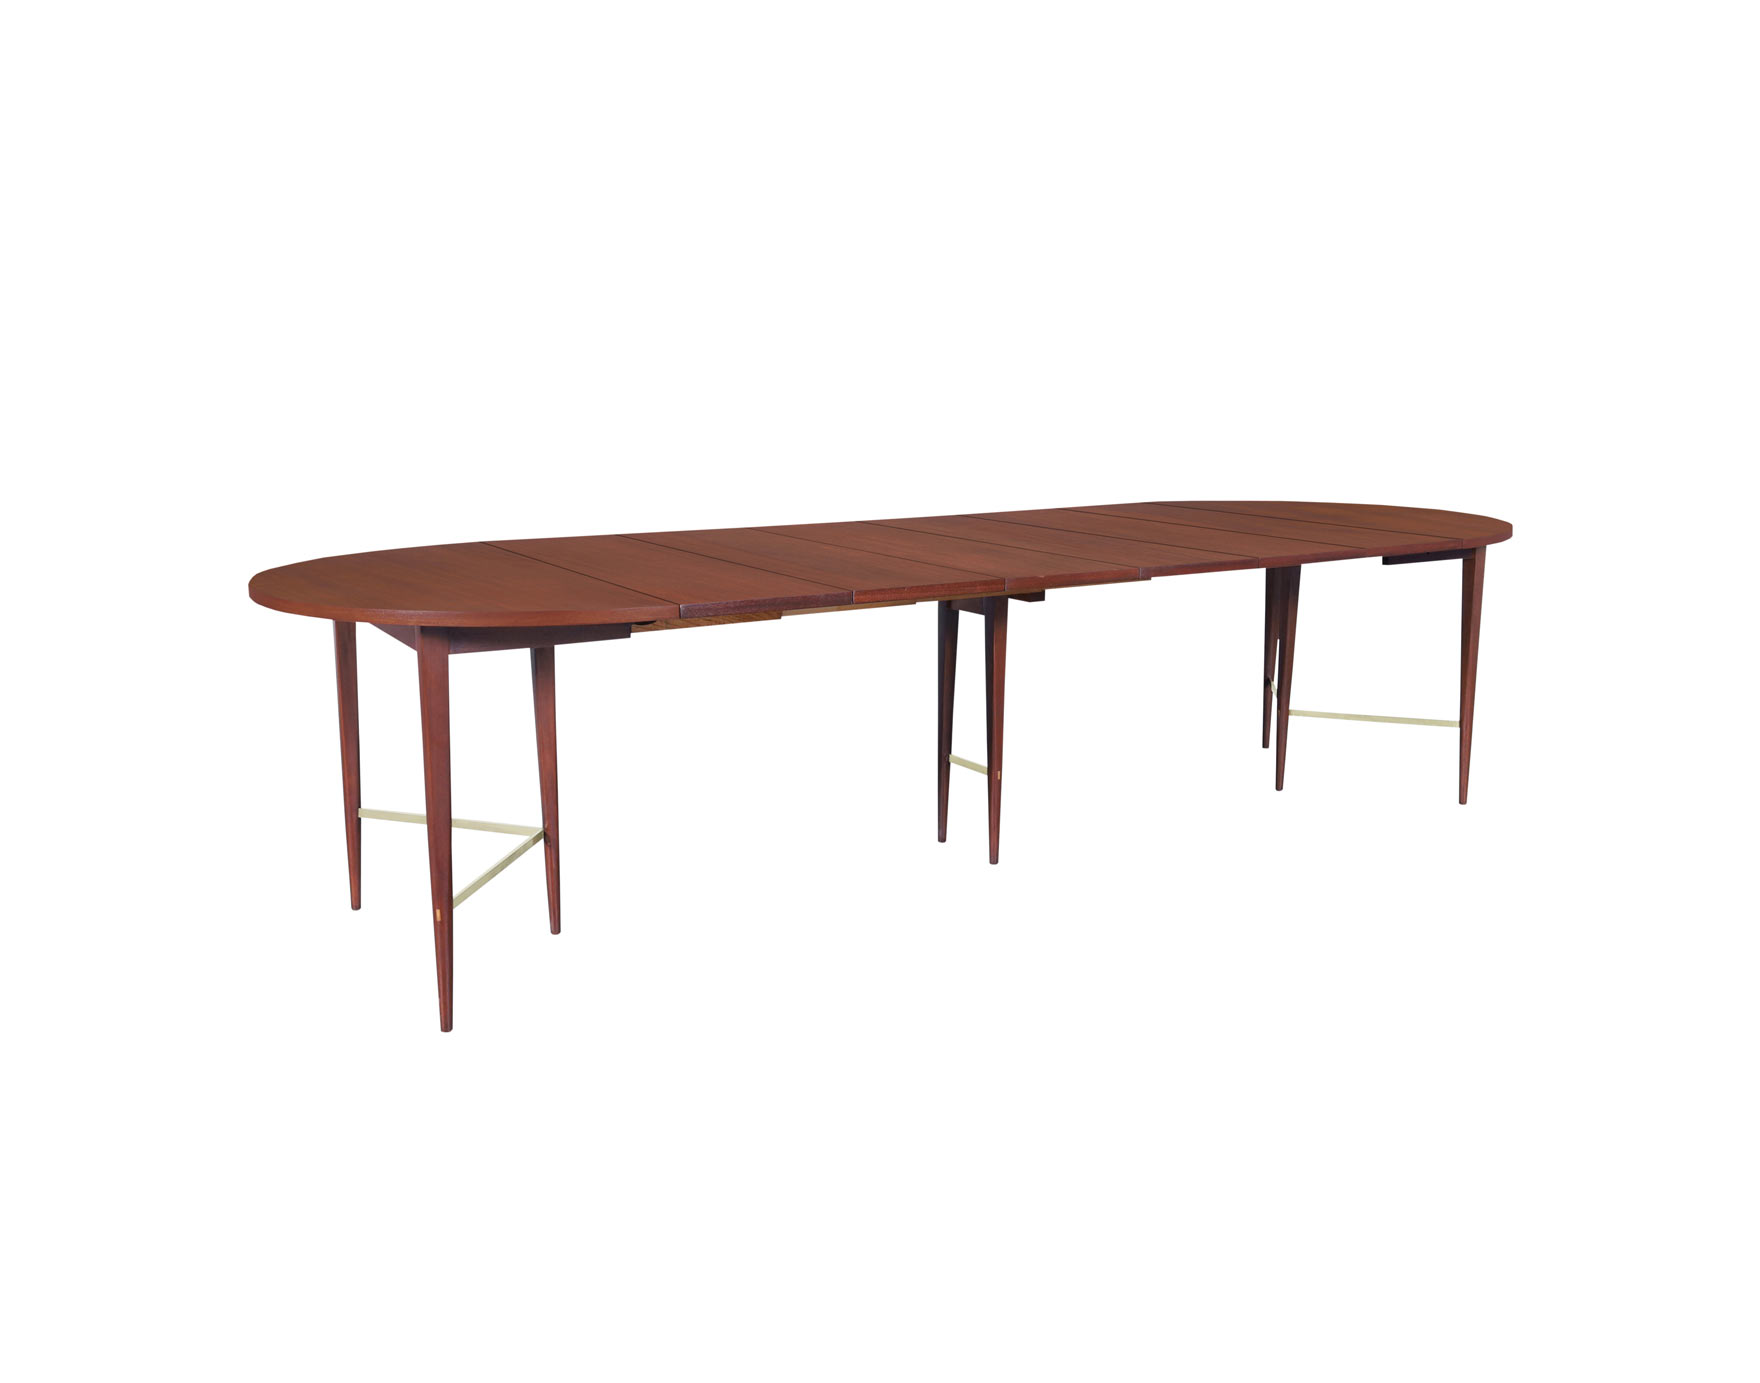 Vintage Mahogany and Brass Irwin Collection Dining Table by Paul McCobb